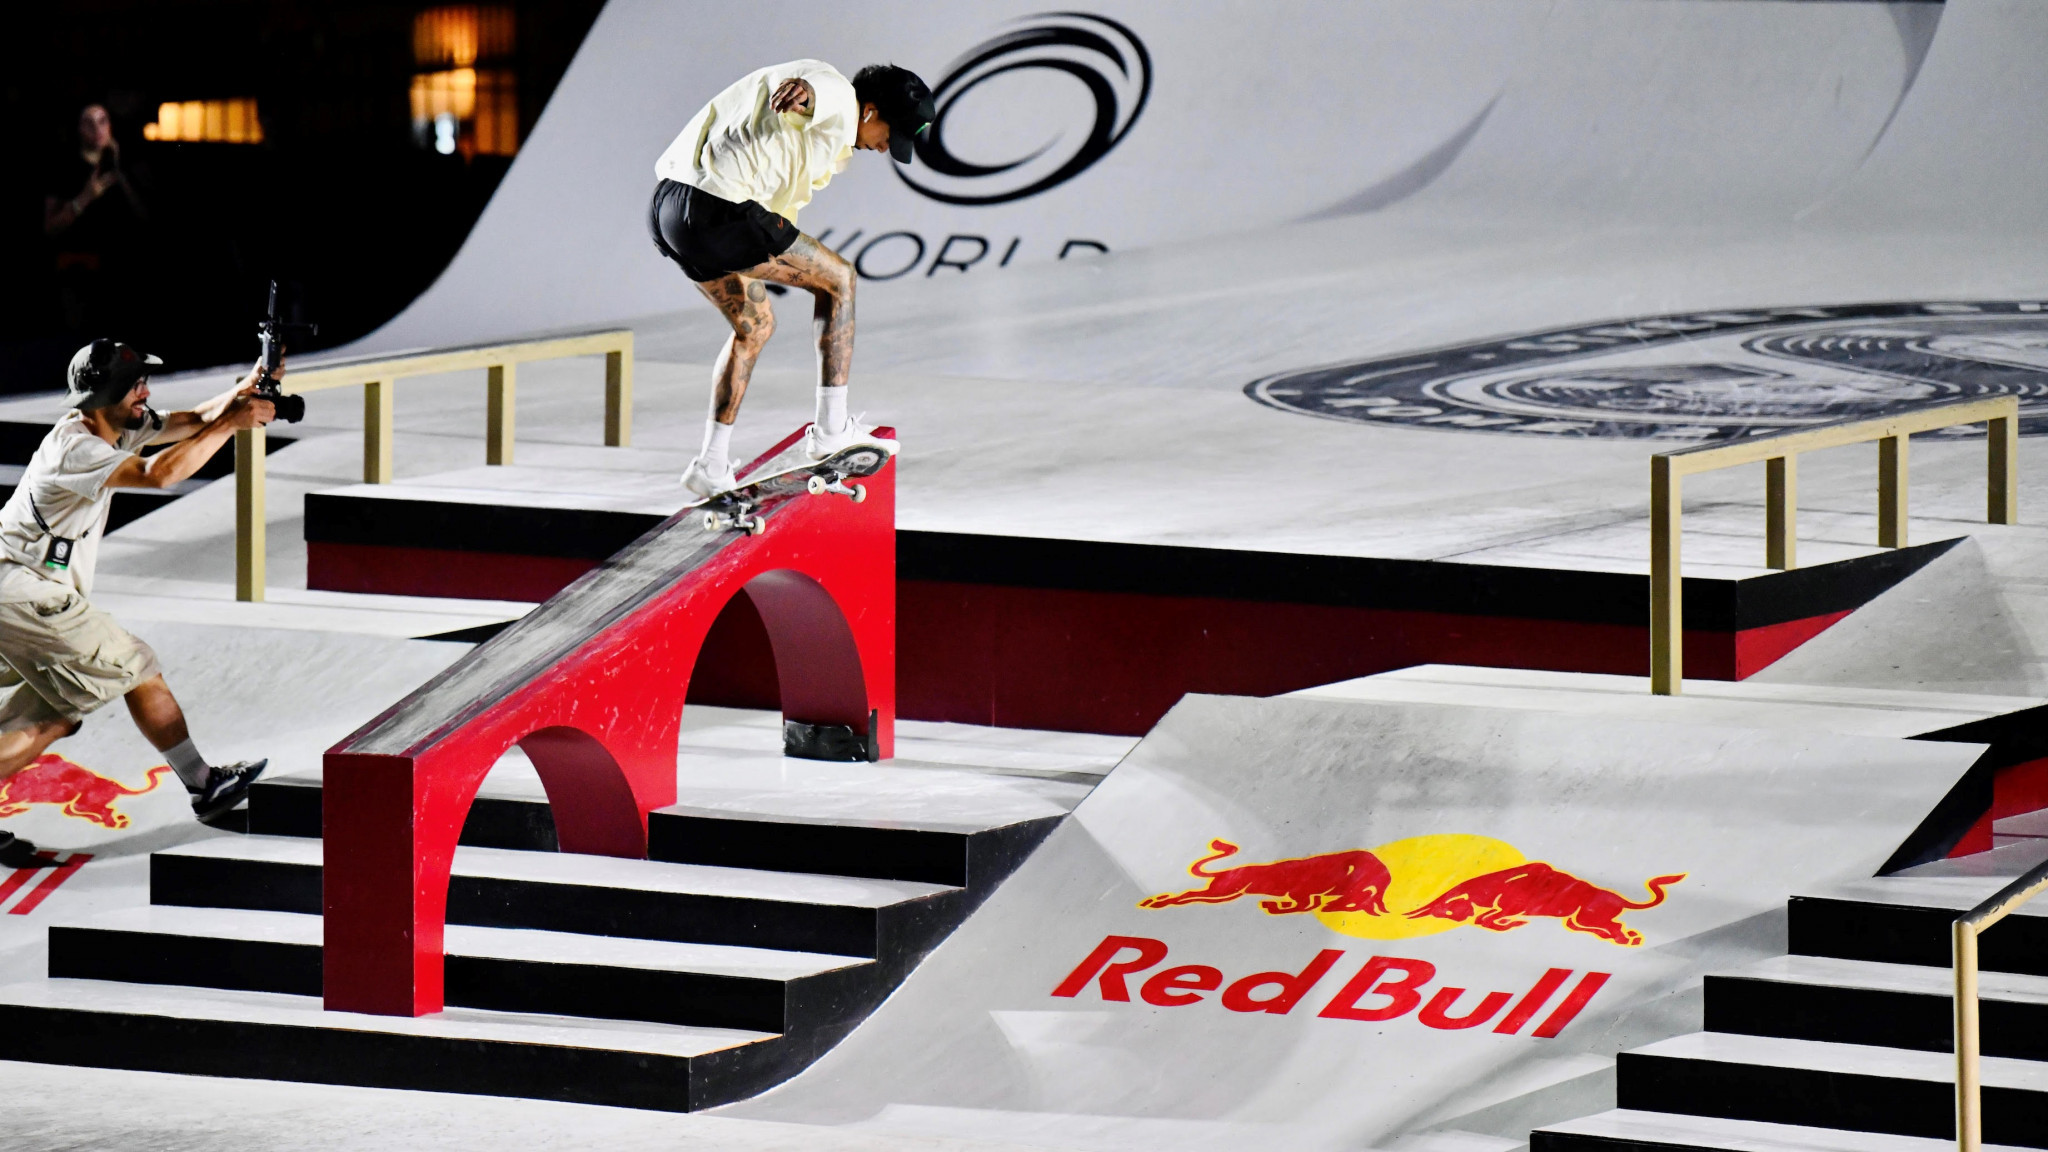 Nyjah Huston of the United States proved too strong as he captured the men's crown ©World Skate